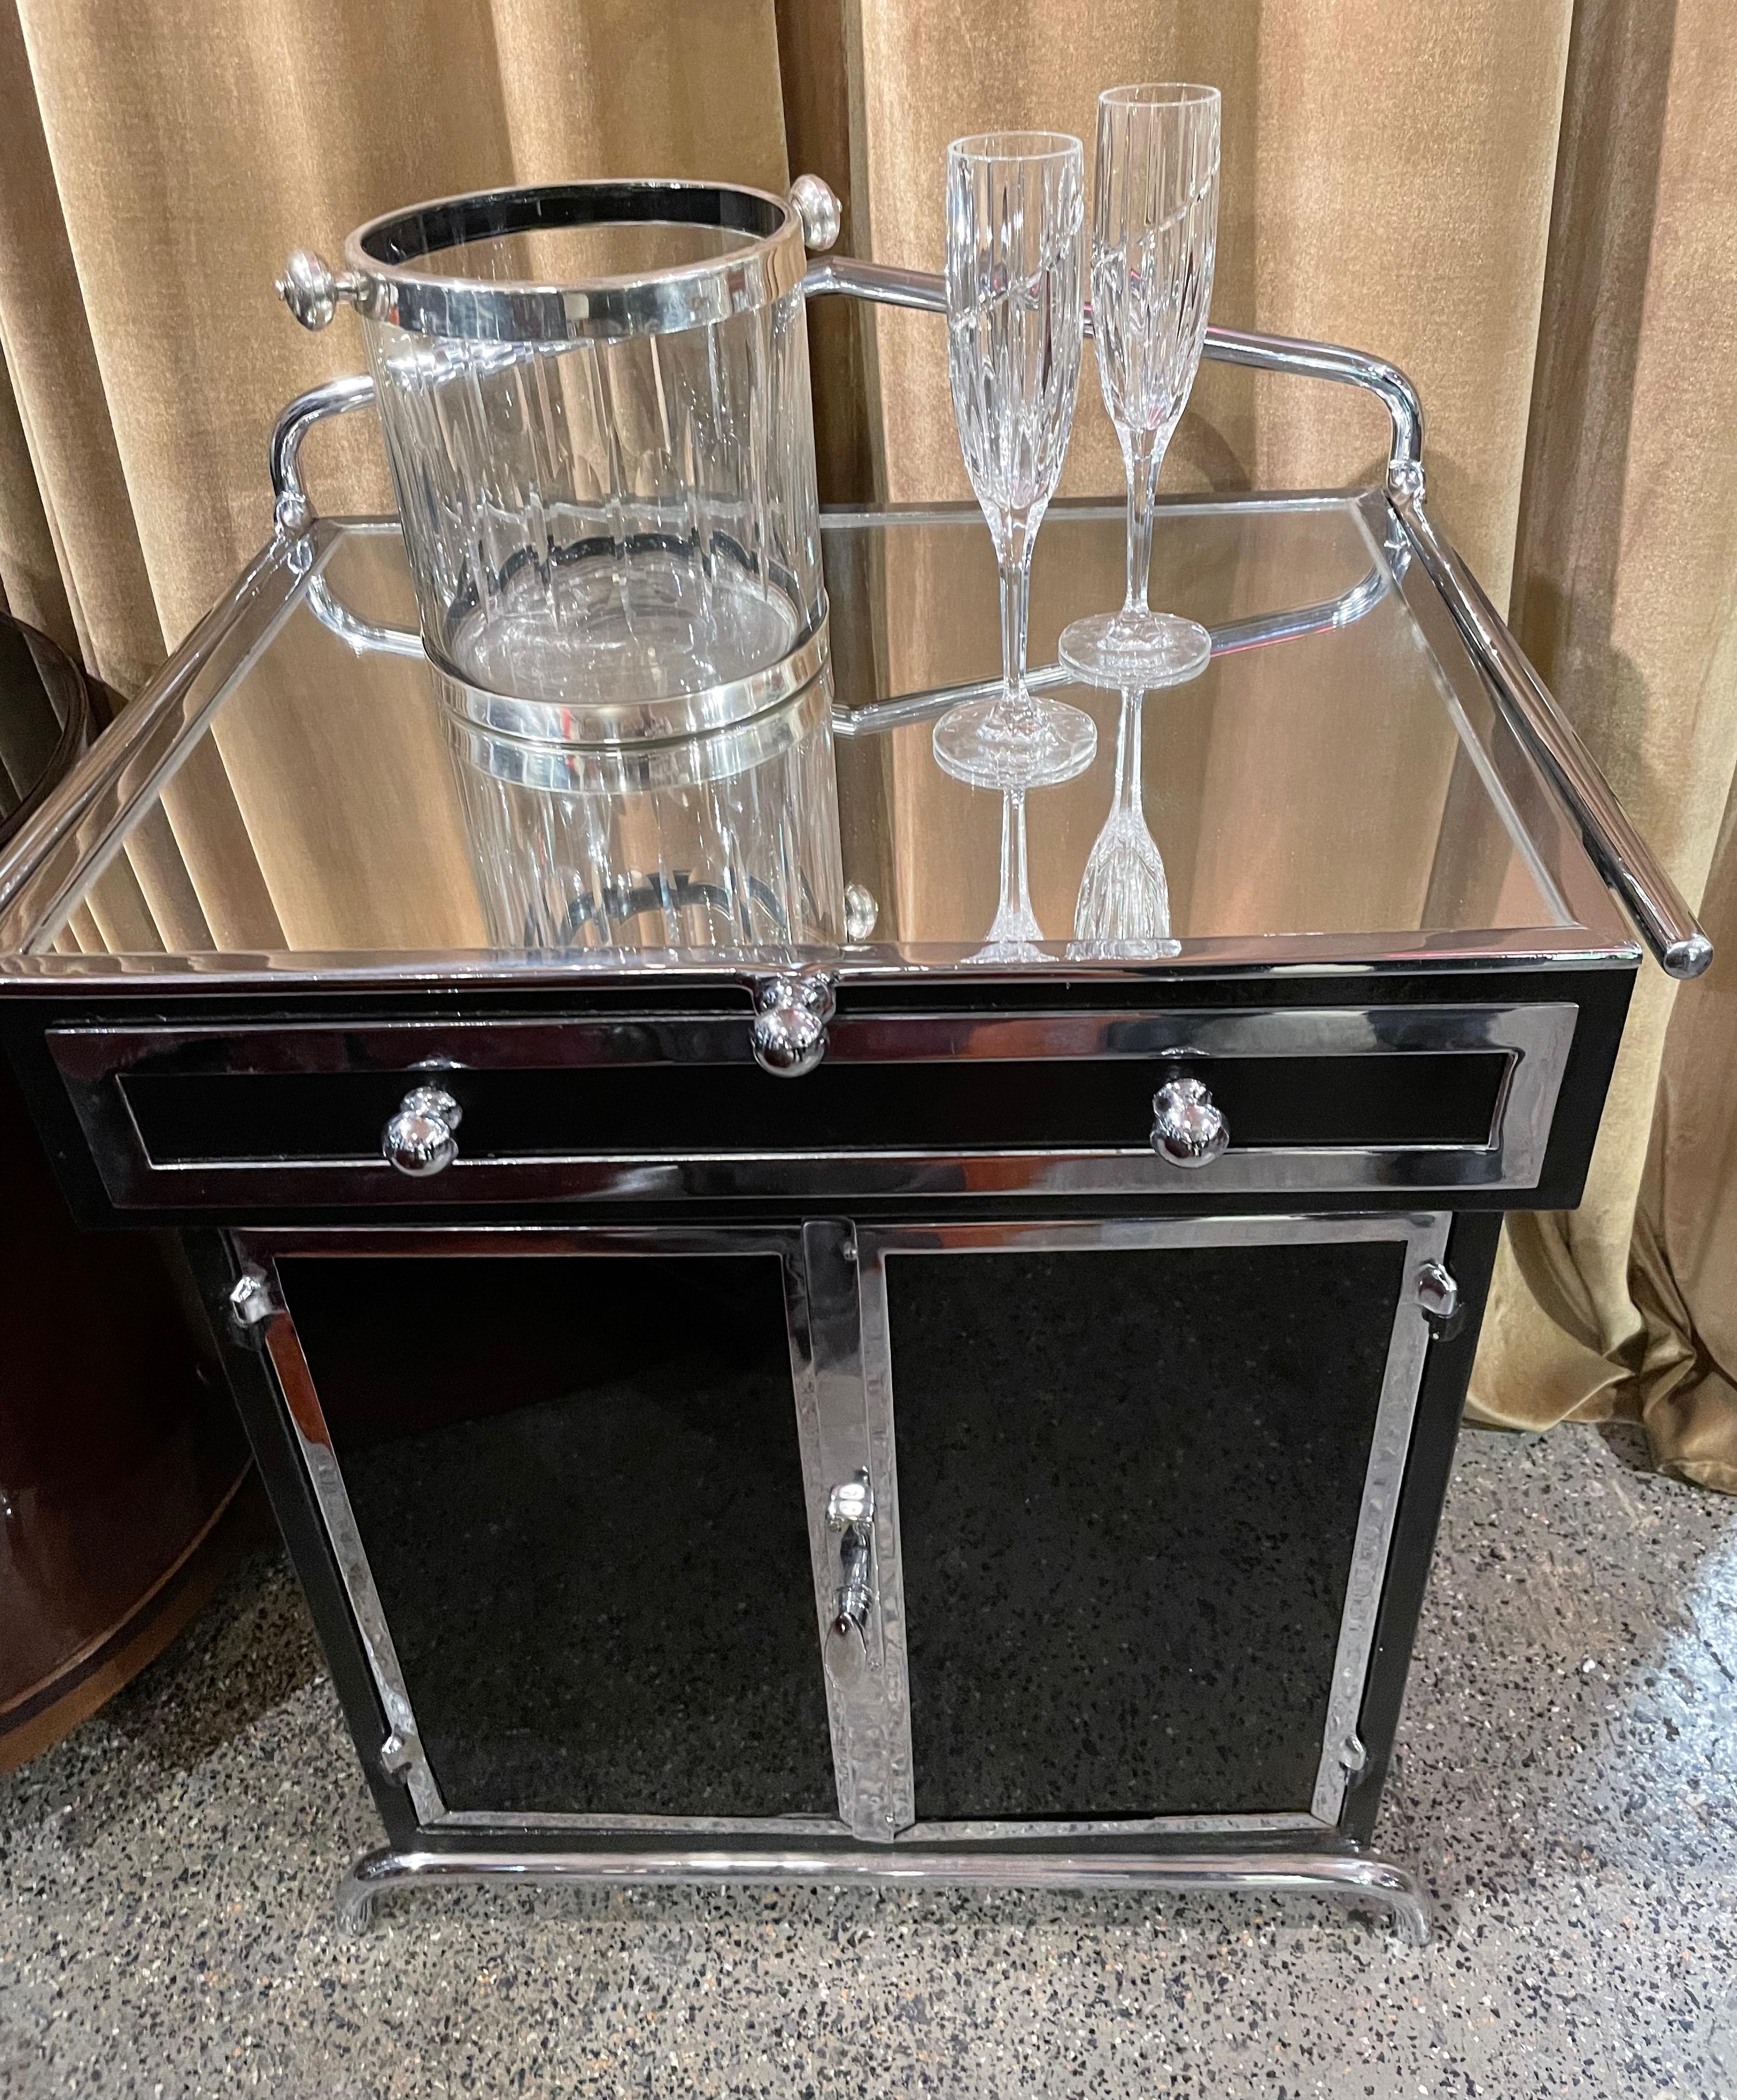 Art Deco bar or display case, a “Vitrine” as it is called in France, fashioned of chrome with black lacquer, glass, and mirrors that is the perfect way to show off some special bar accouterment or a collection. There is plenty of storage in the